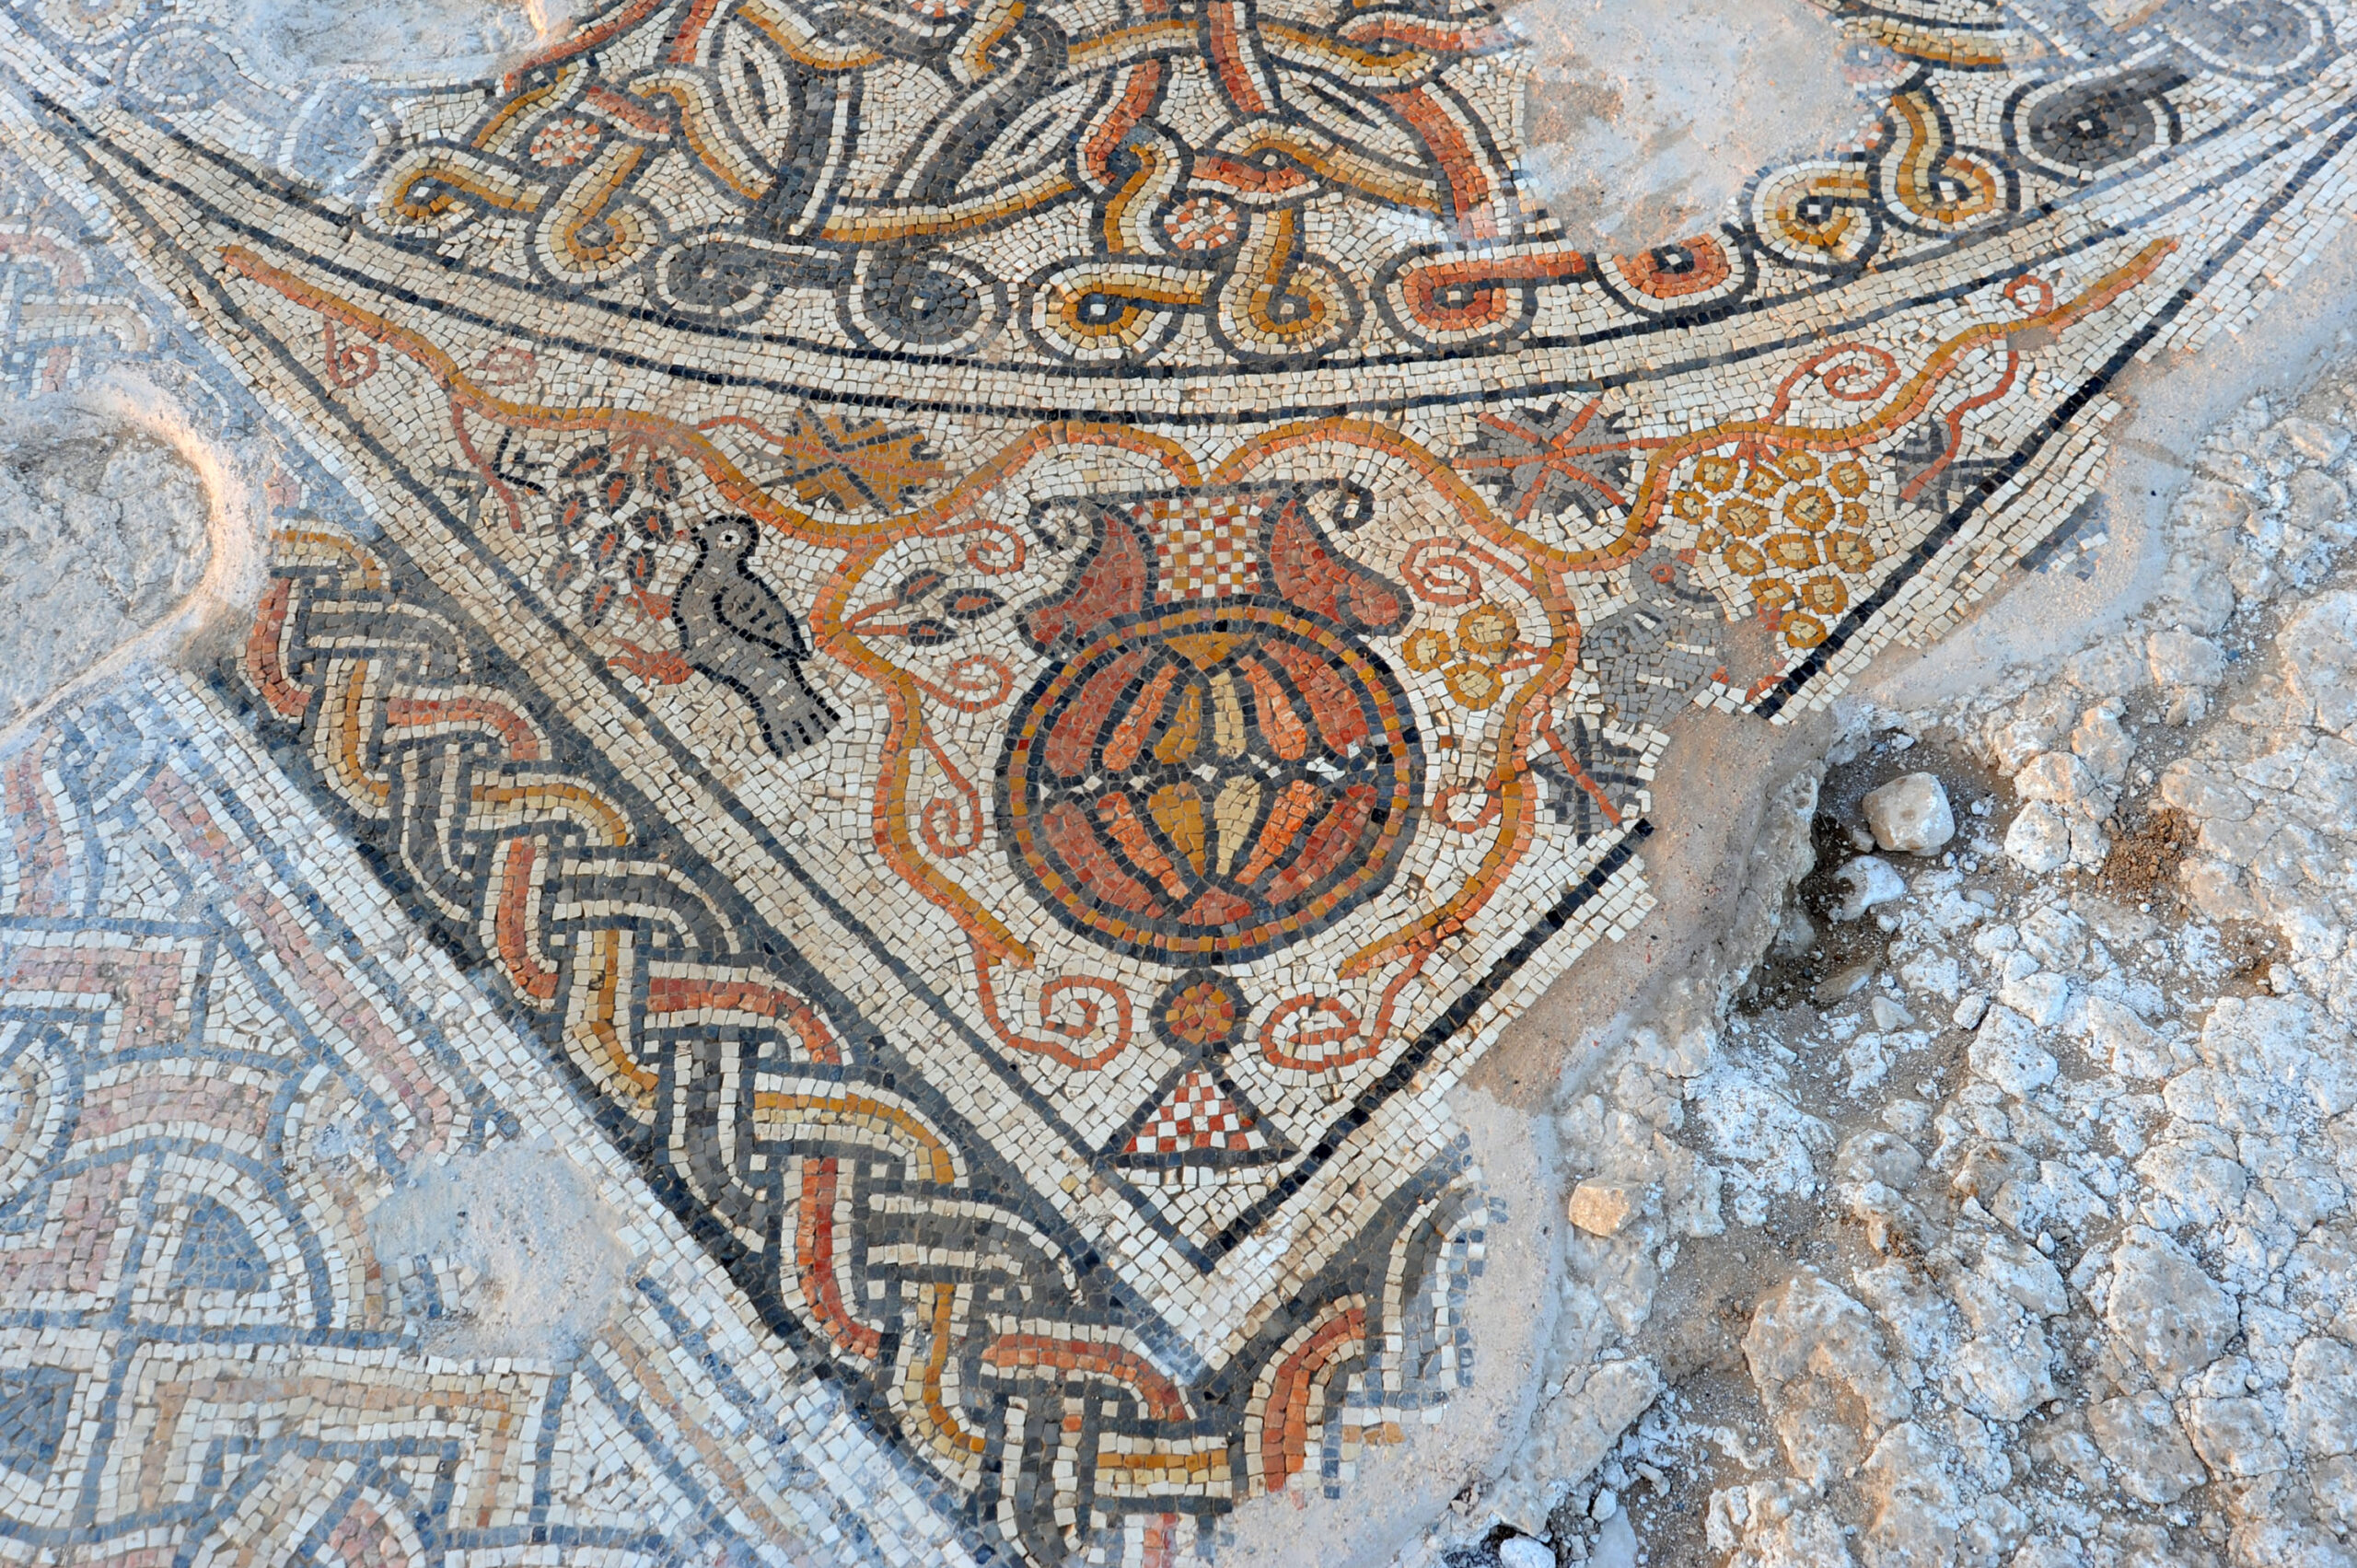 Archaeologists say the mosaic is unique because of the large number of motifs incorporated in one carpet.